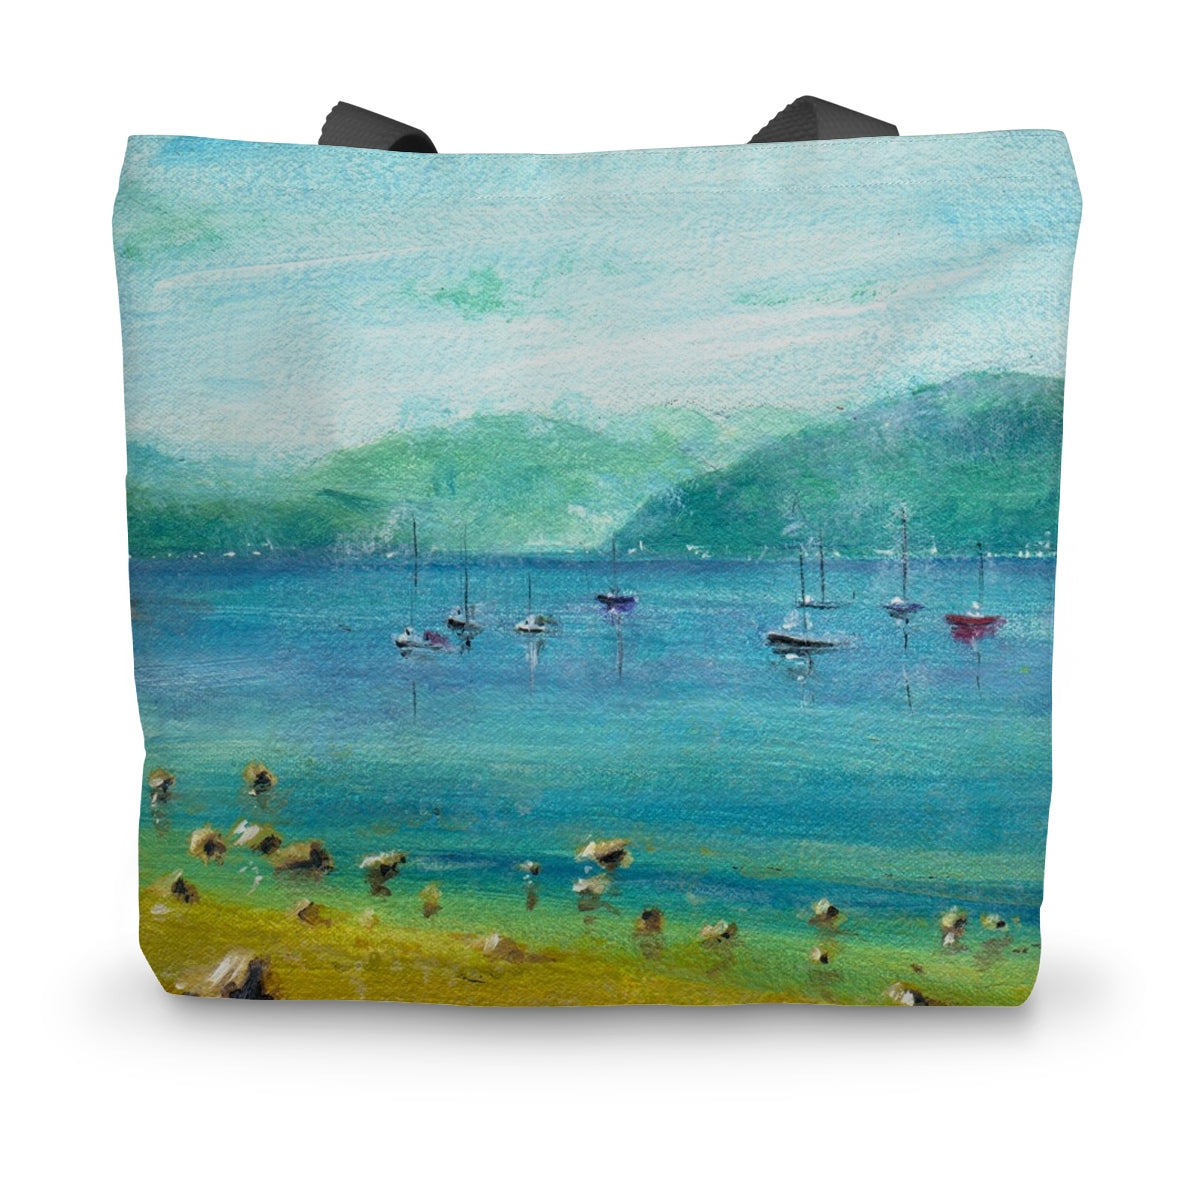 A Clyde Summer Day Art Gifts Canvas Tote Bag-Bags-River Clyde Art Gallery-14"x18.5"-Paintings, Prints, Homeware, Art Gifts From Scotland By Scottish Artist Kevin Hunter